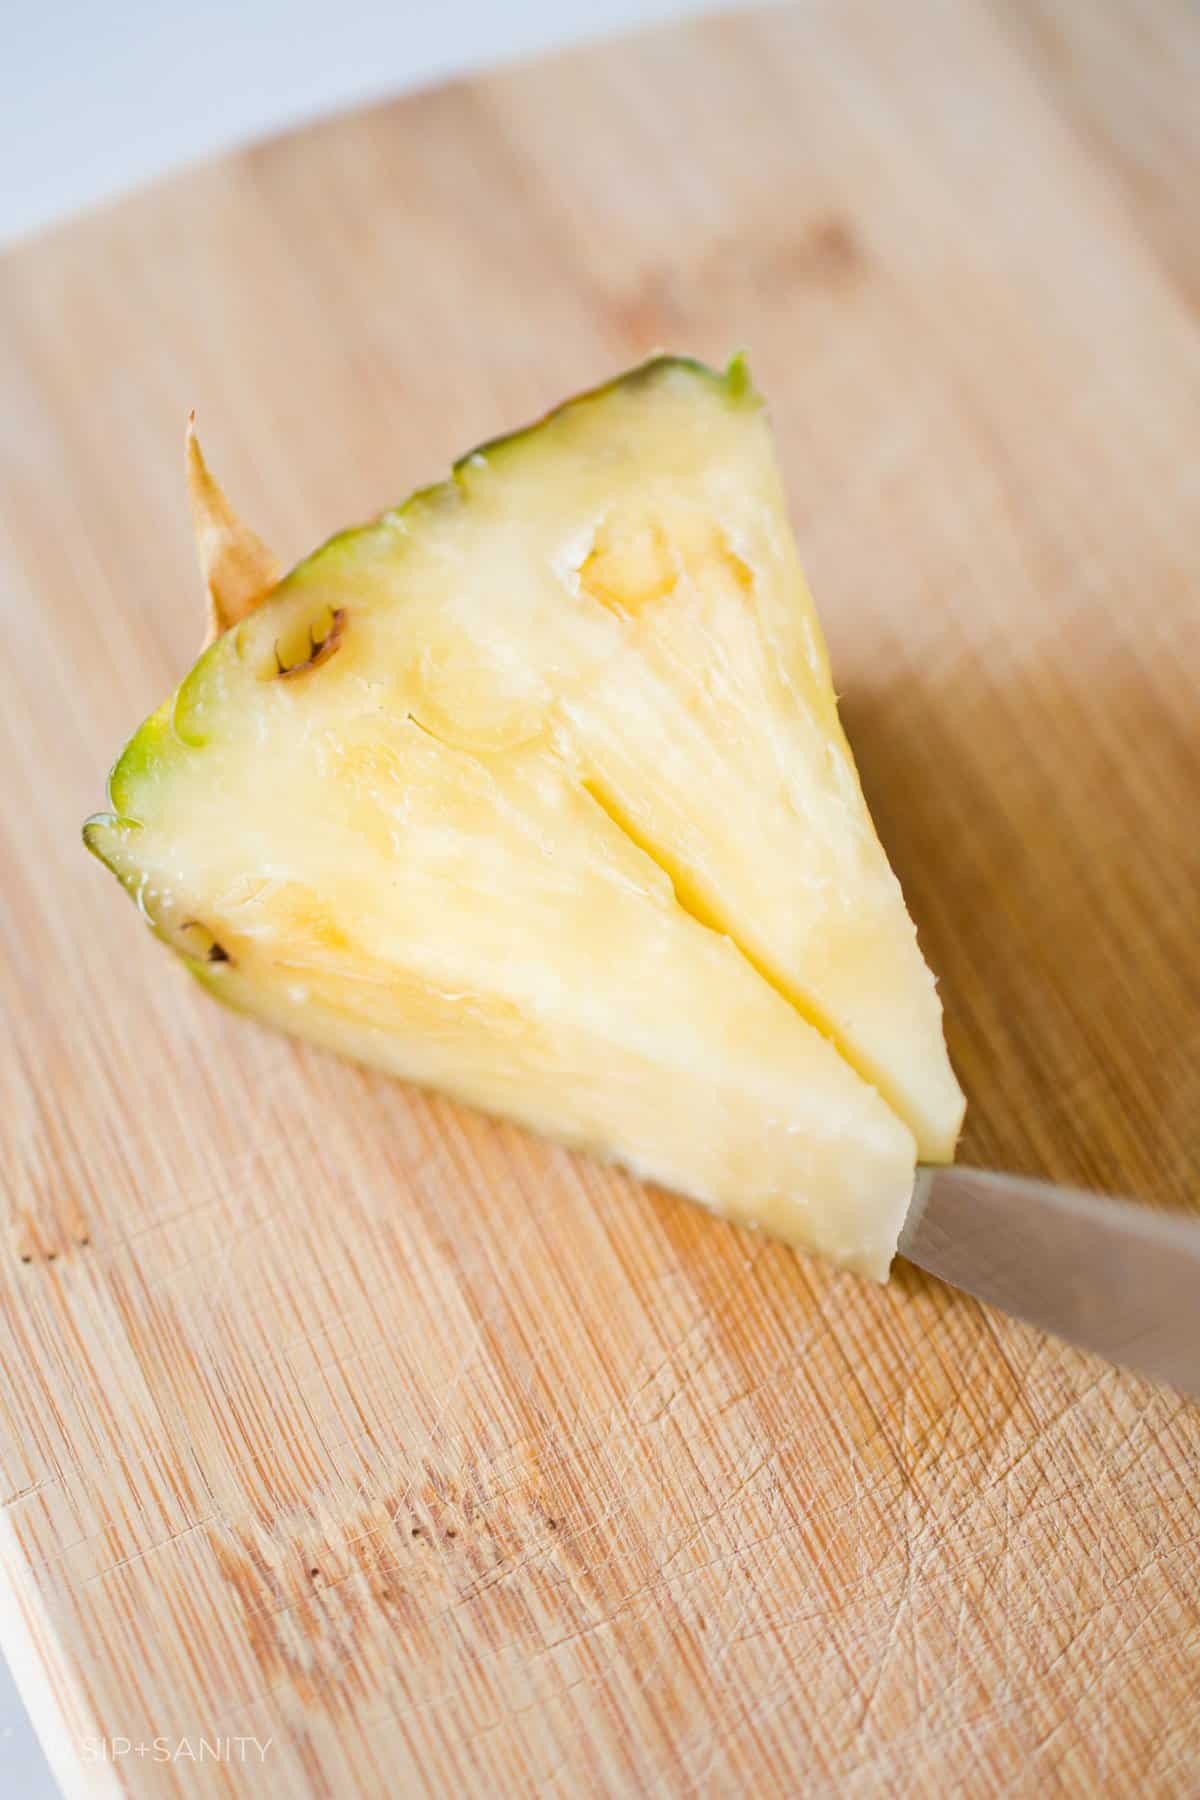 A knife cutting a slit into a wedge of pineapple.